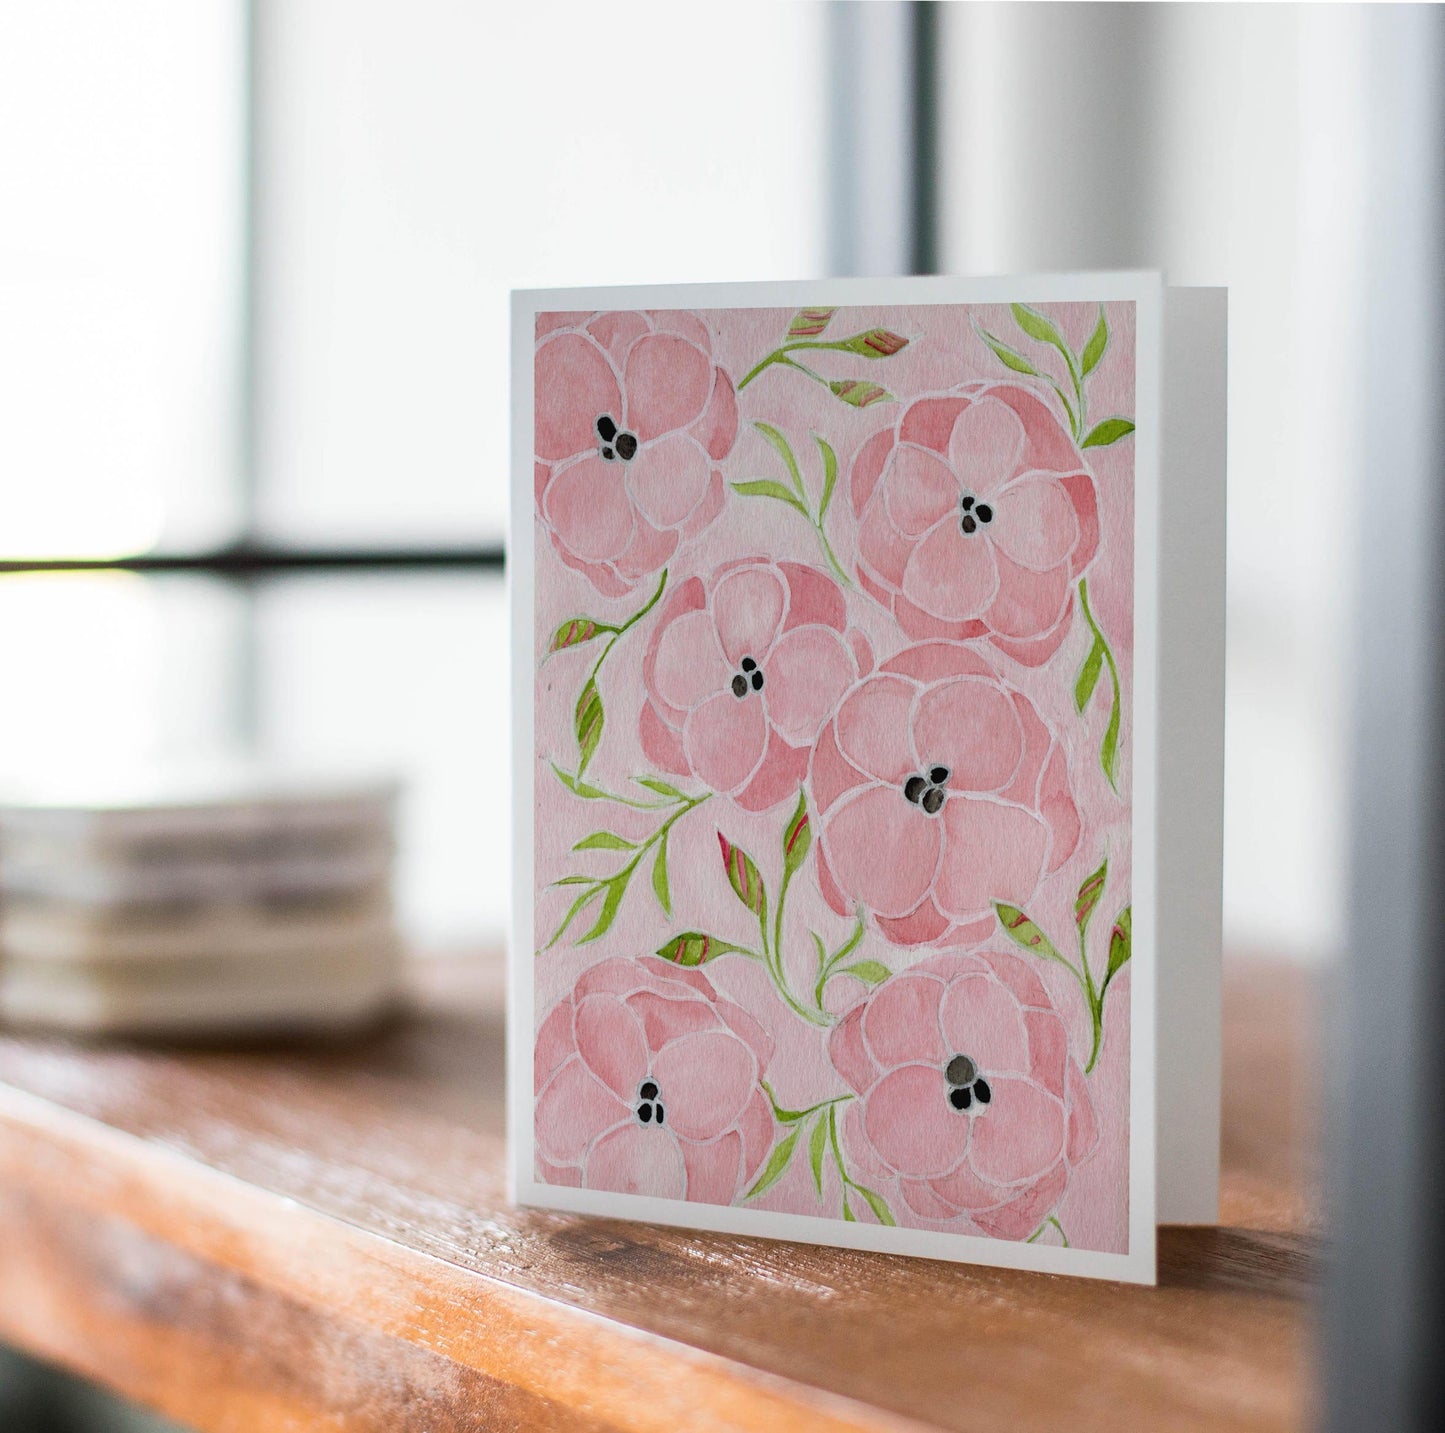 PinkPolish Design Card Pack "Floral" 4 Card Pack of Handmade Notecards